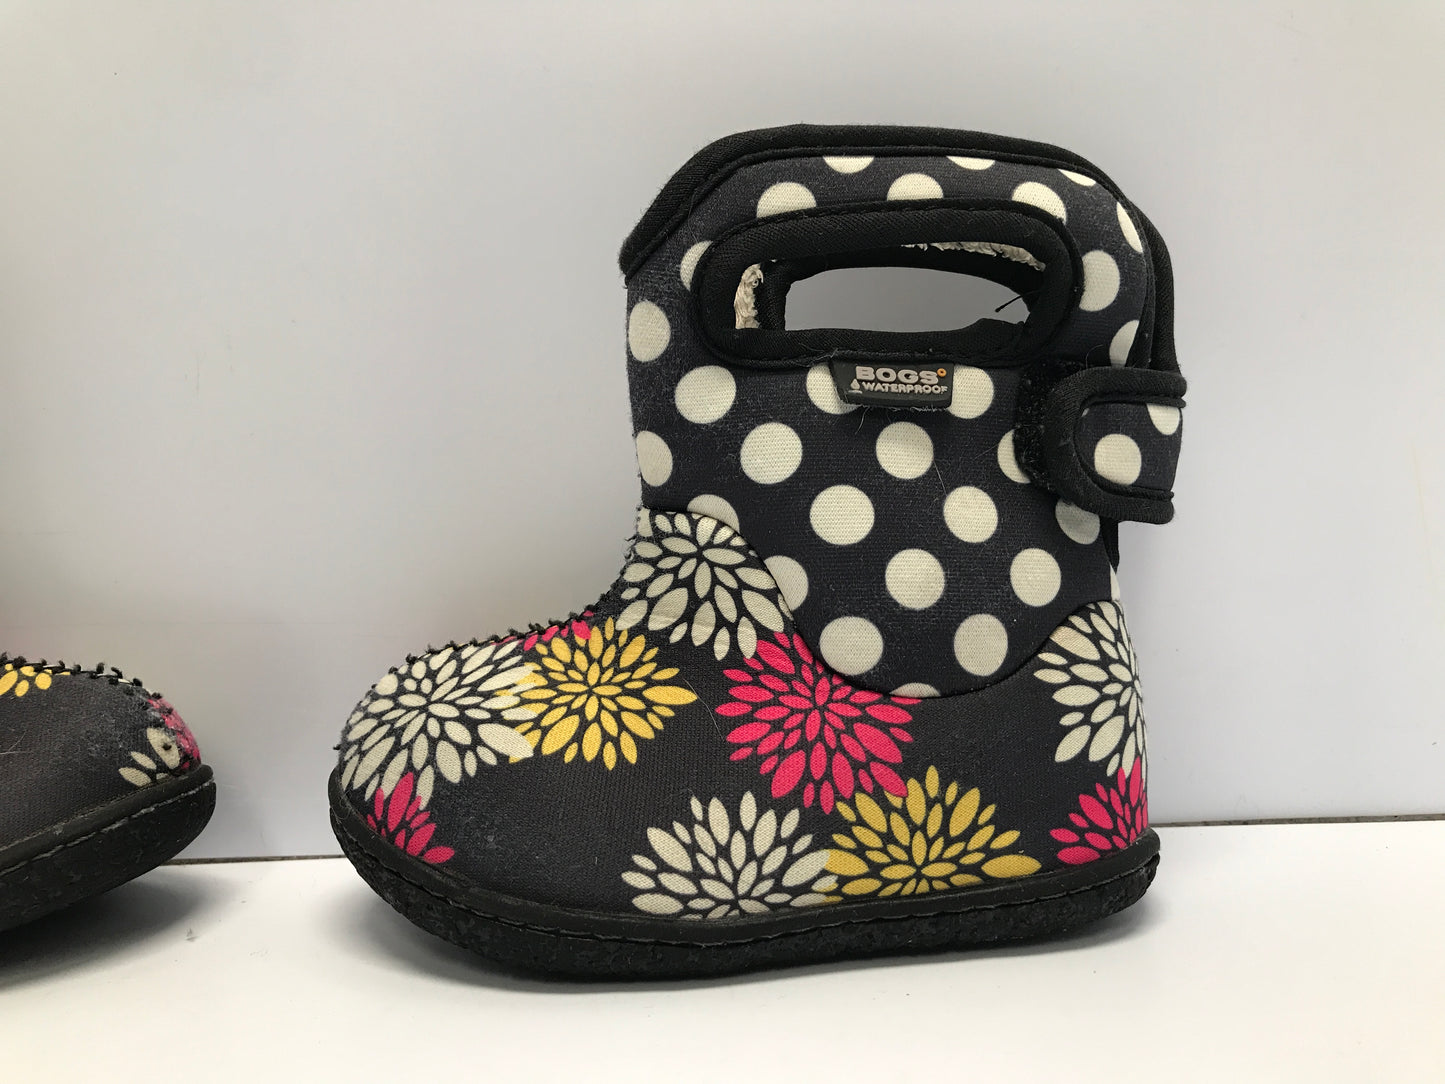 Rain Boots Bogs Baby Toddler Size 6 Waterproof Neoprene Rubber Sole Black Floral Excellent